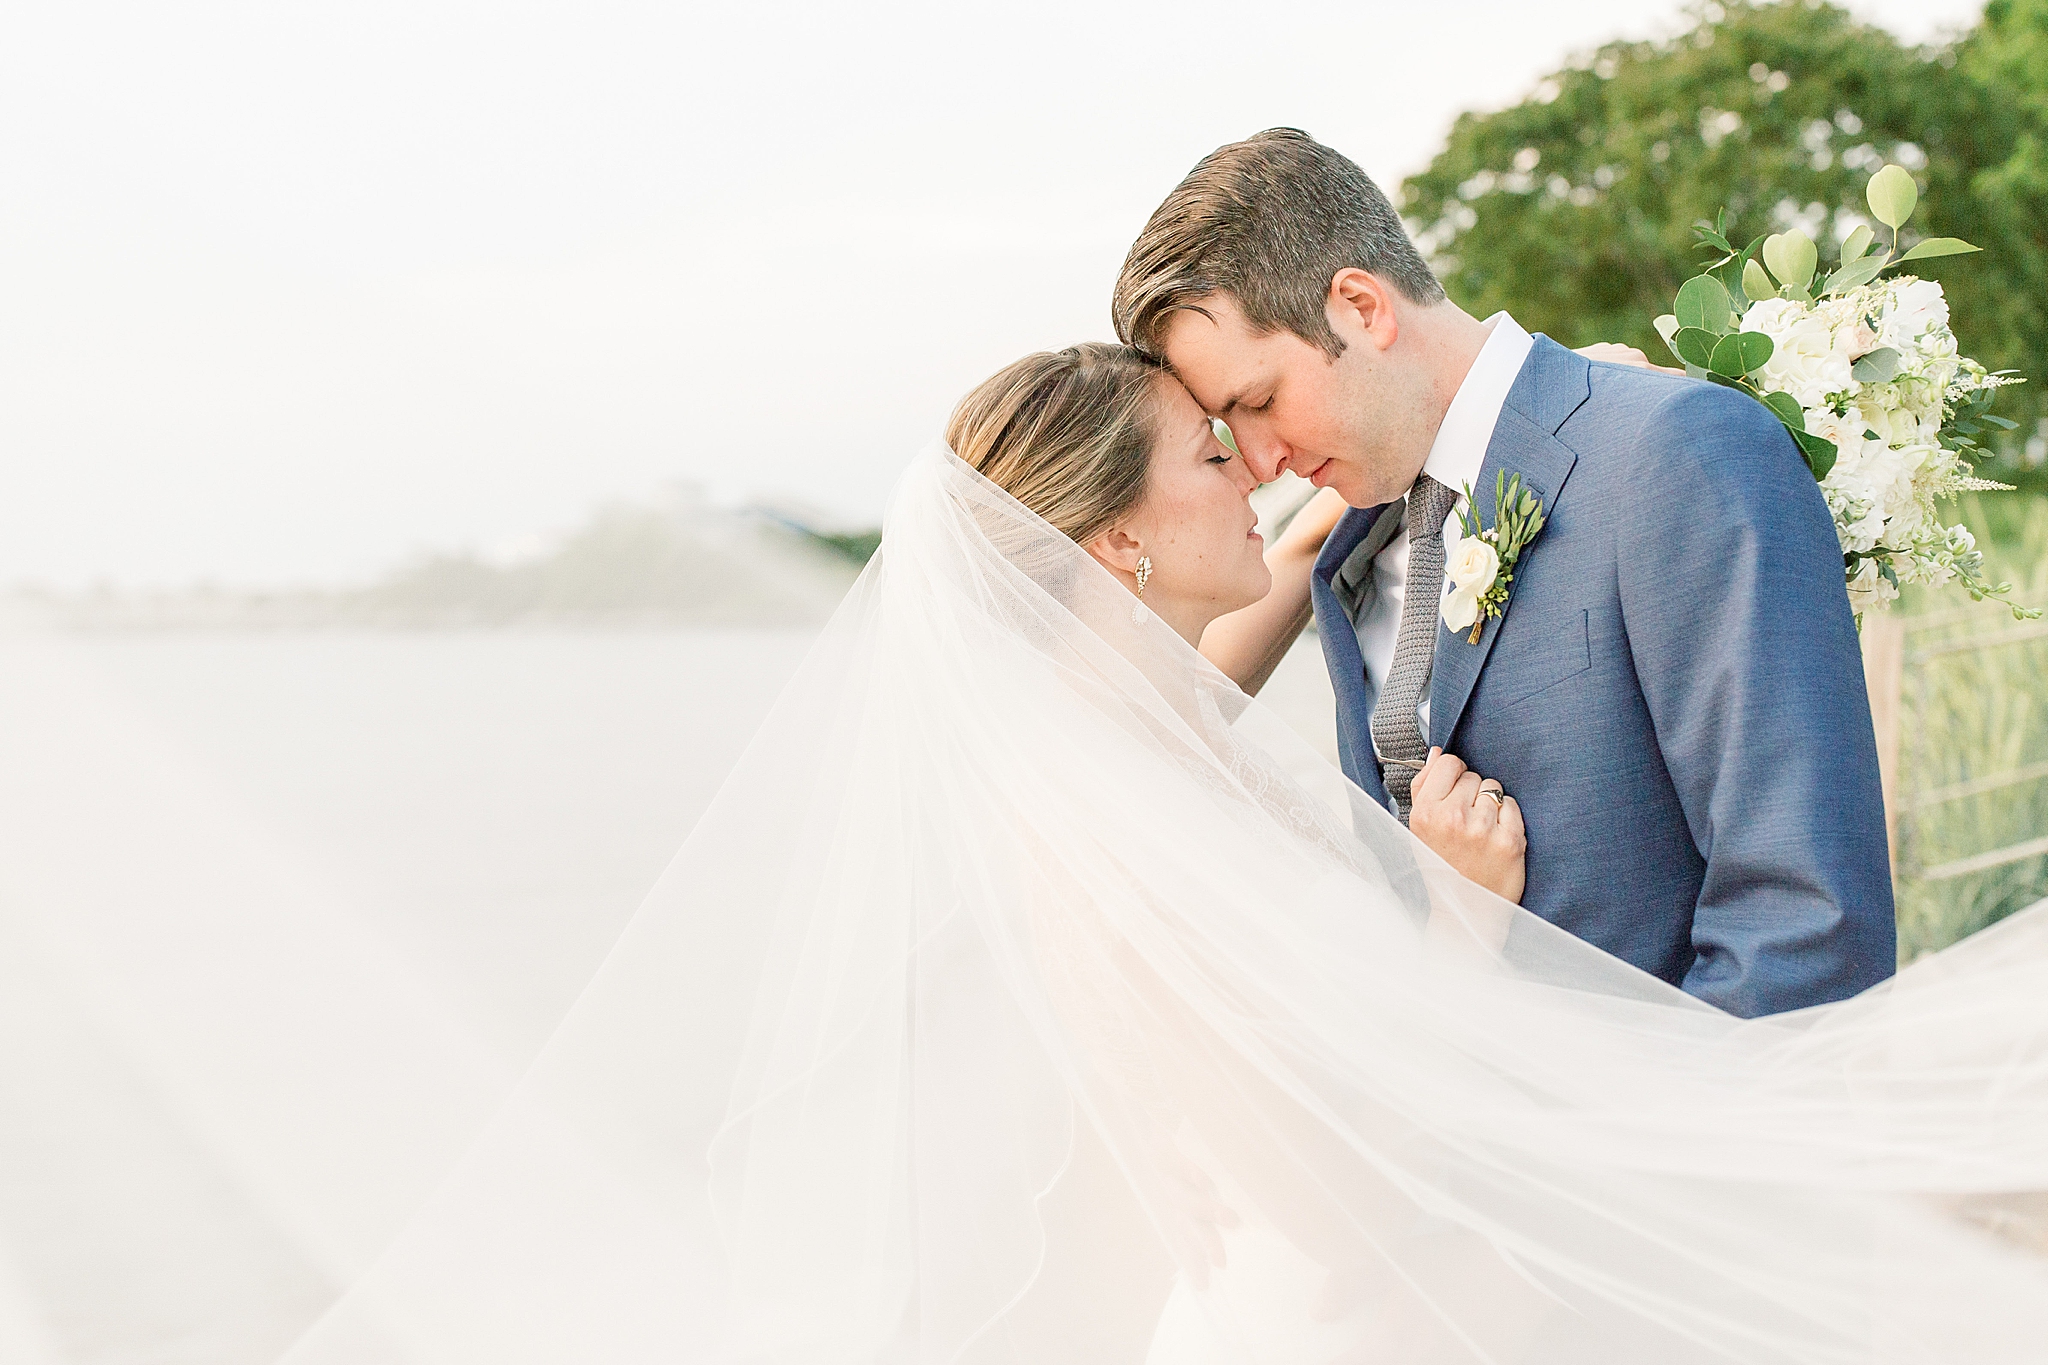 An elegant coastal wedding photographed by Alicia Lacey Photography at the Chesapeake Bay Beach Club in Stevensville, MD.